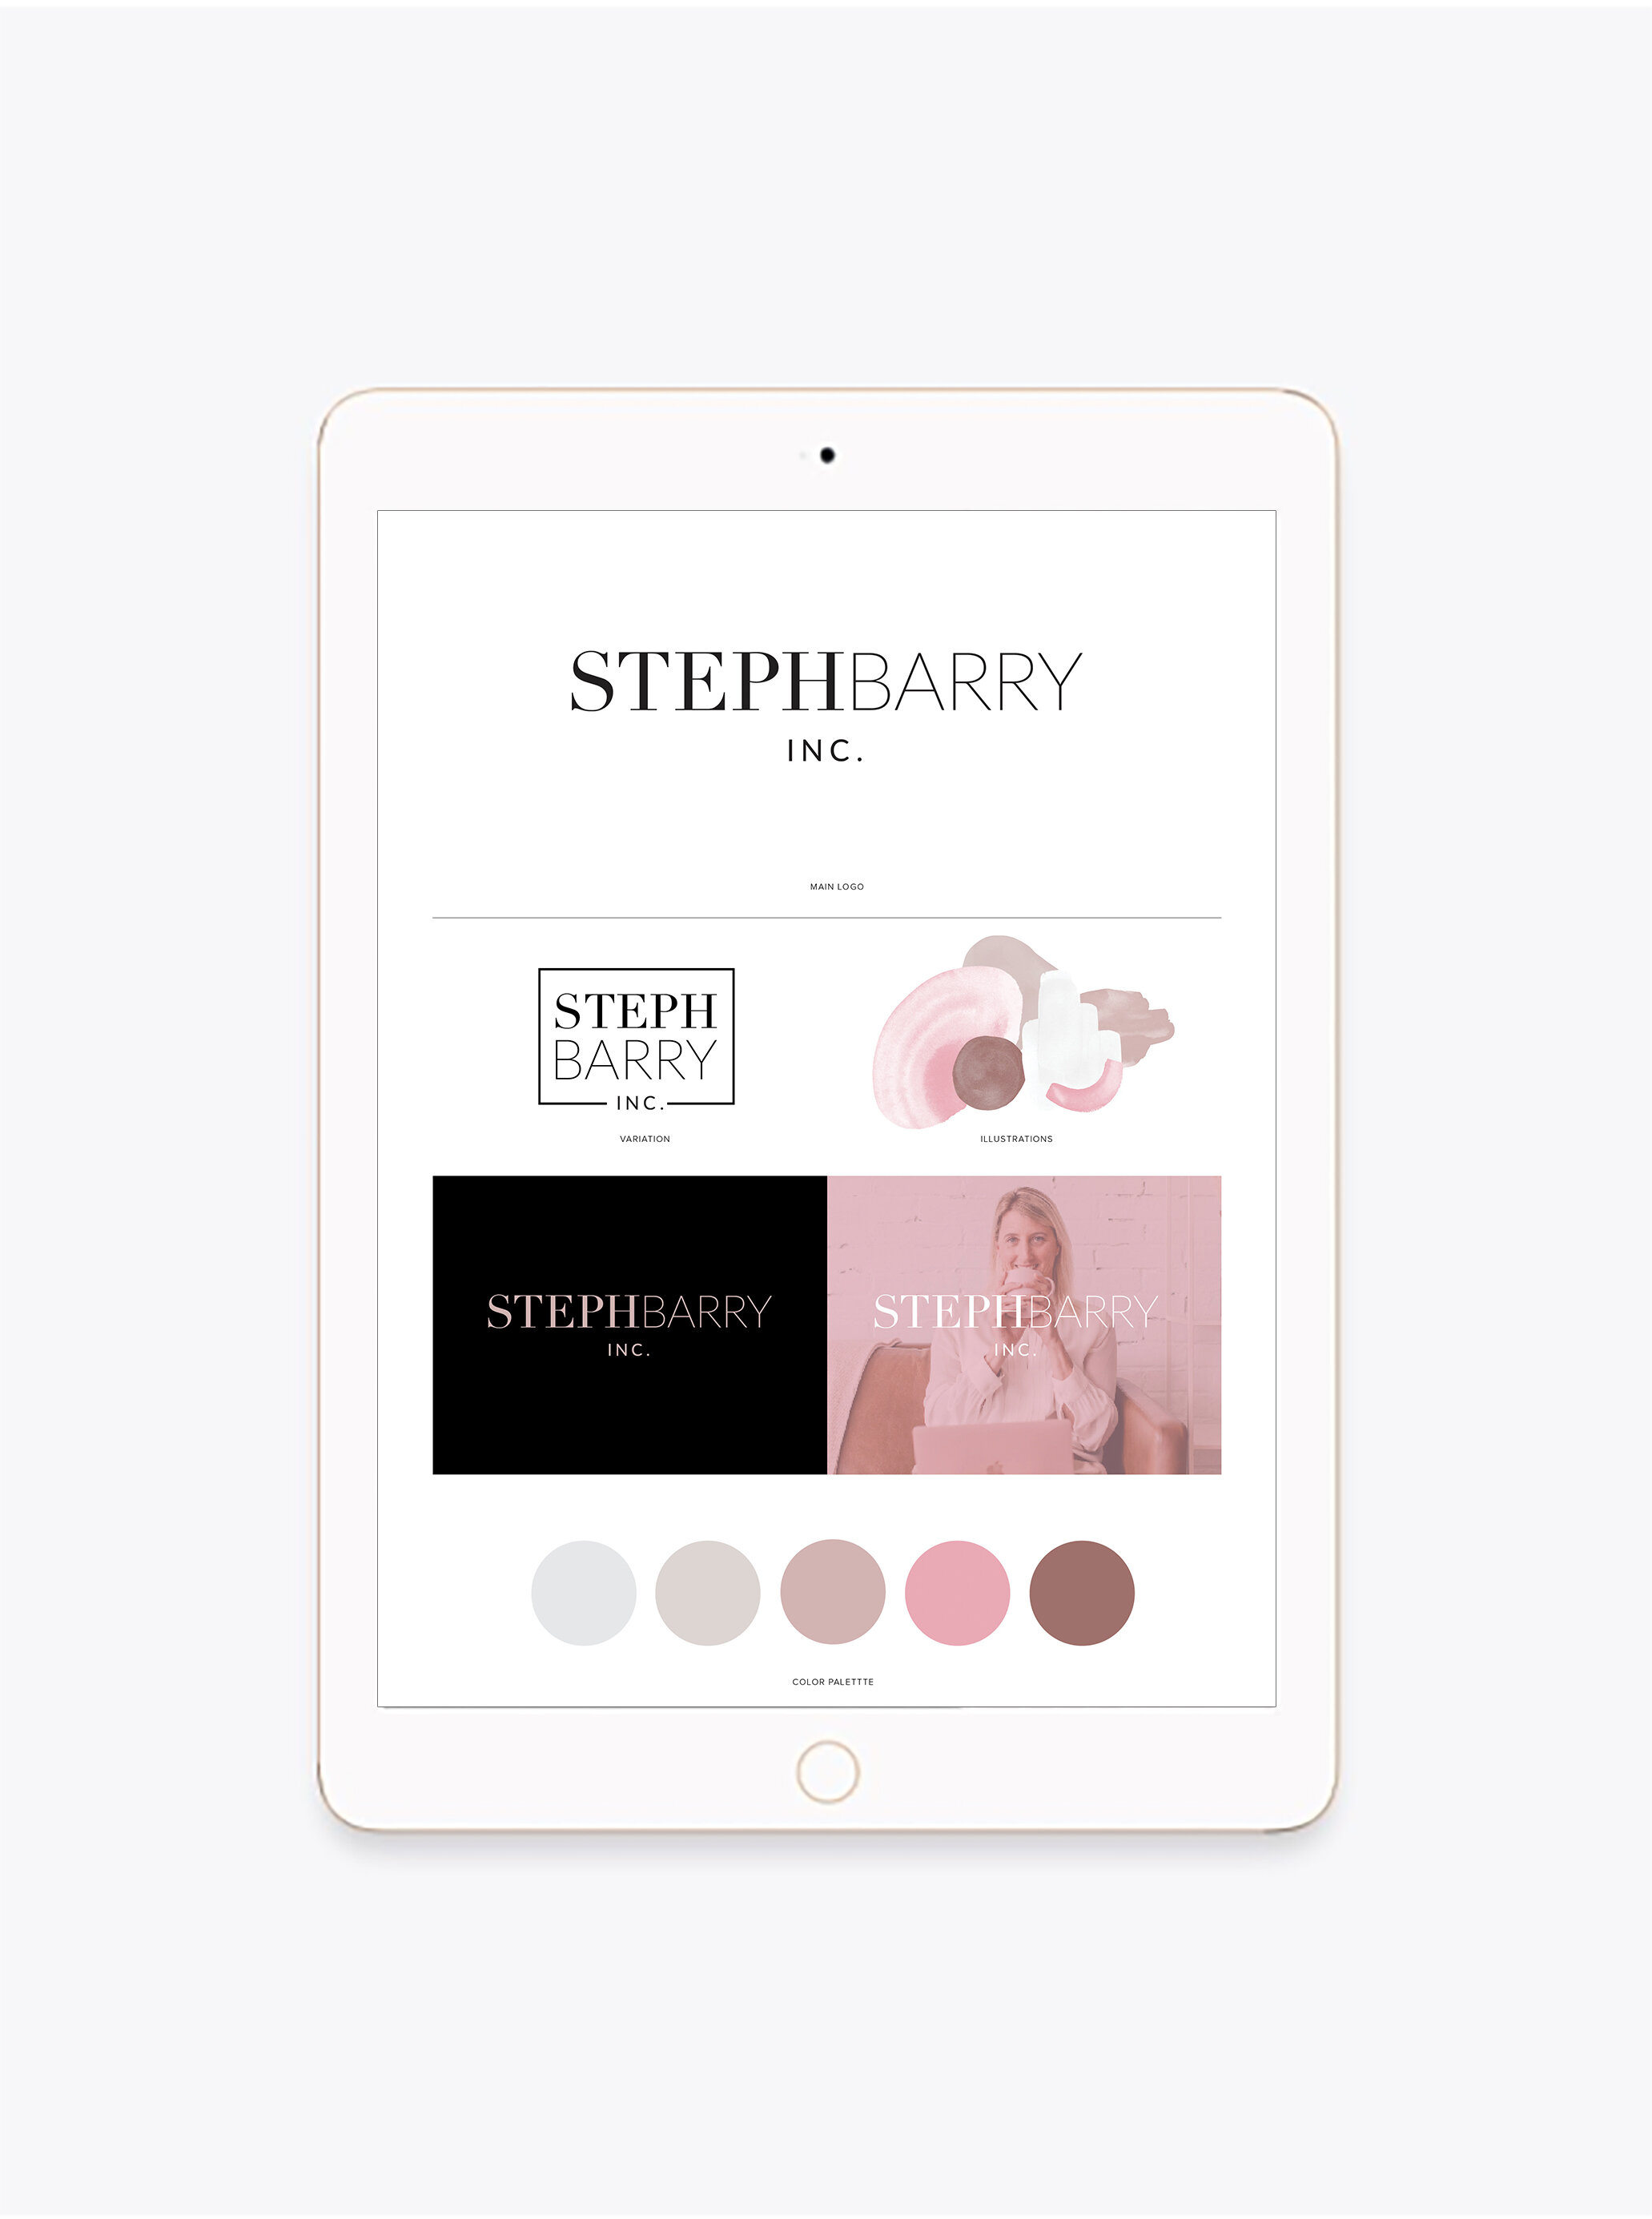 iPad showing branding package deliverables designed by Gretchen Kamp in NYC